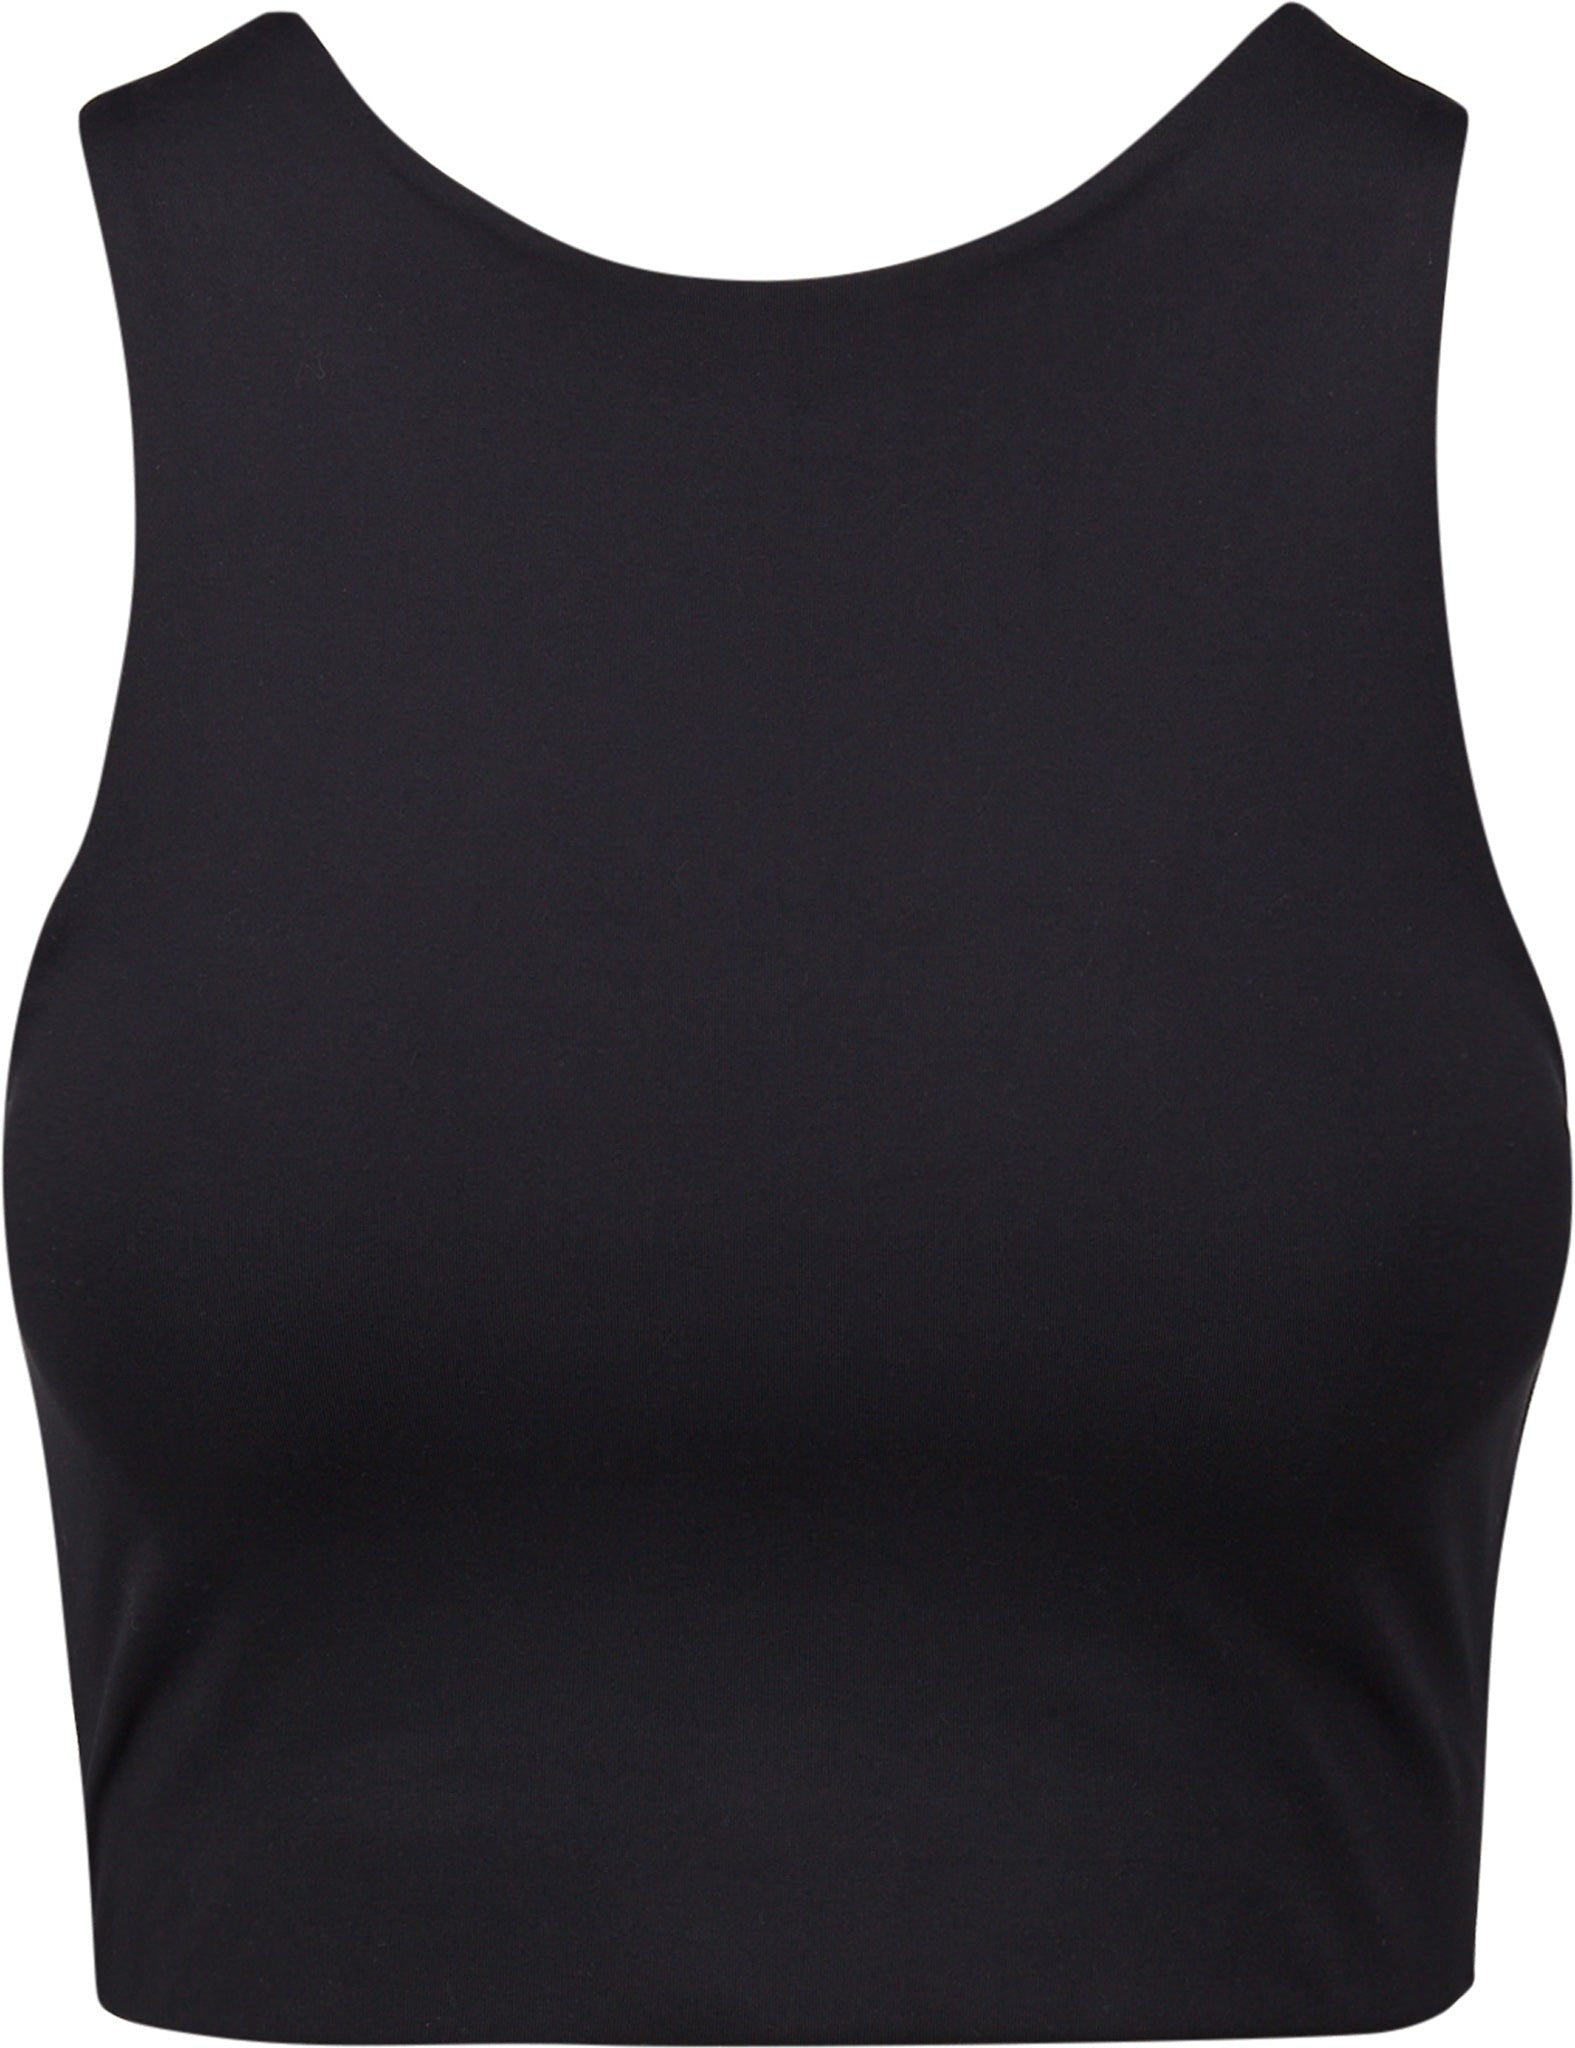 RE/DONE Baby Muscle Tank Top - Farfetch